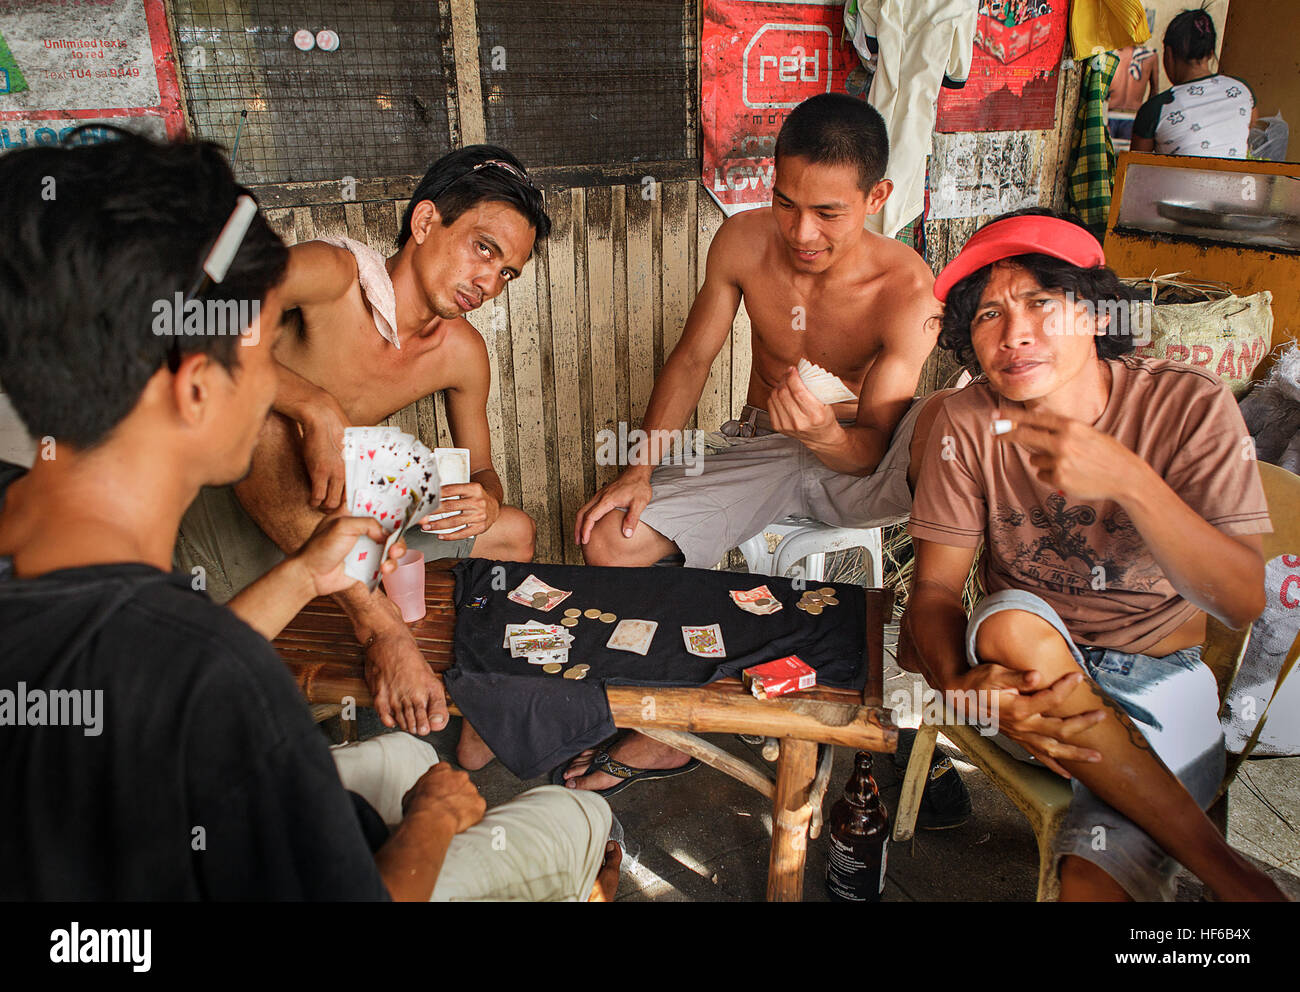 Four Filipino men play a gambling game with cards in Bogo City, Cebu Island, Philippines. Stock Photo